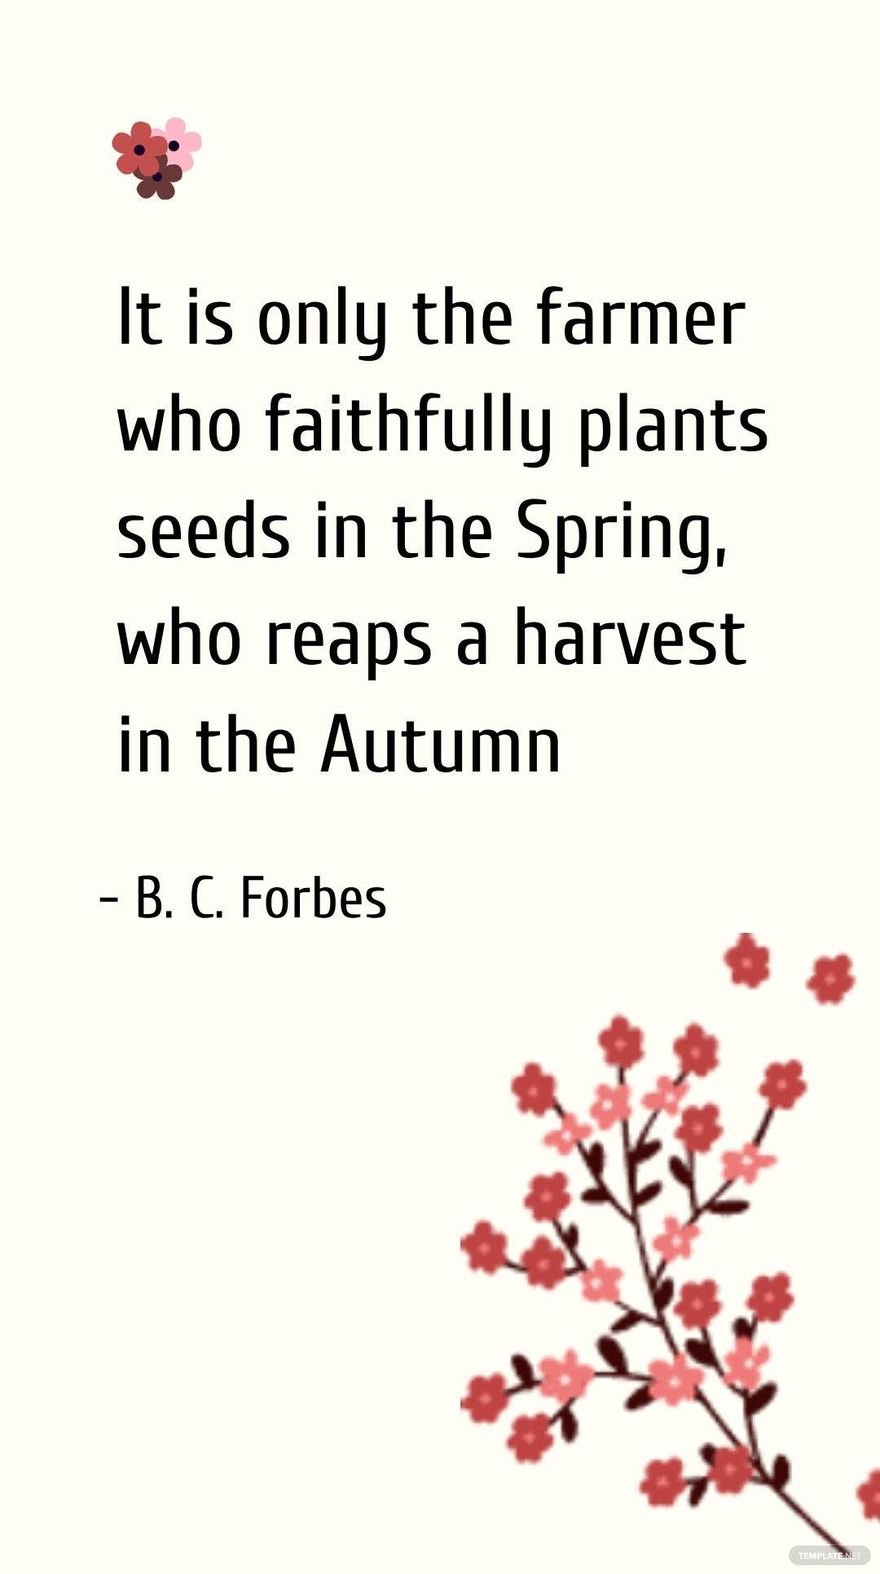 B. C. Forbes - It is only the farmer who faithfully plants seeds in the Spring, who reaps a harvest in the Autumn in JPG